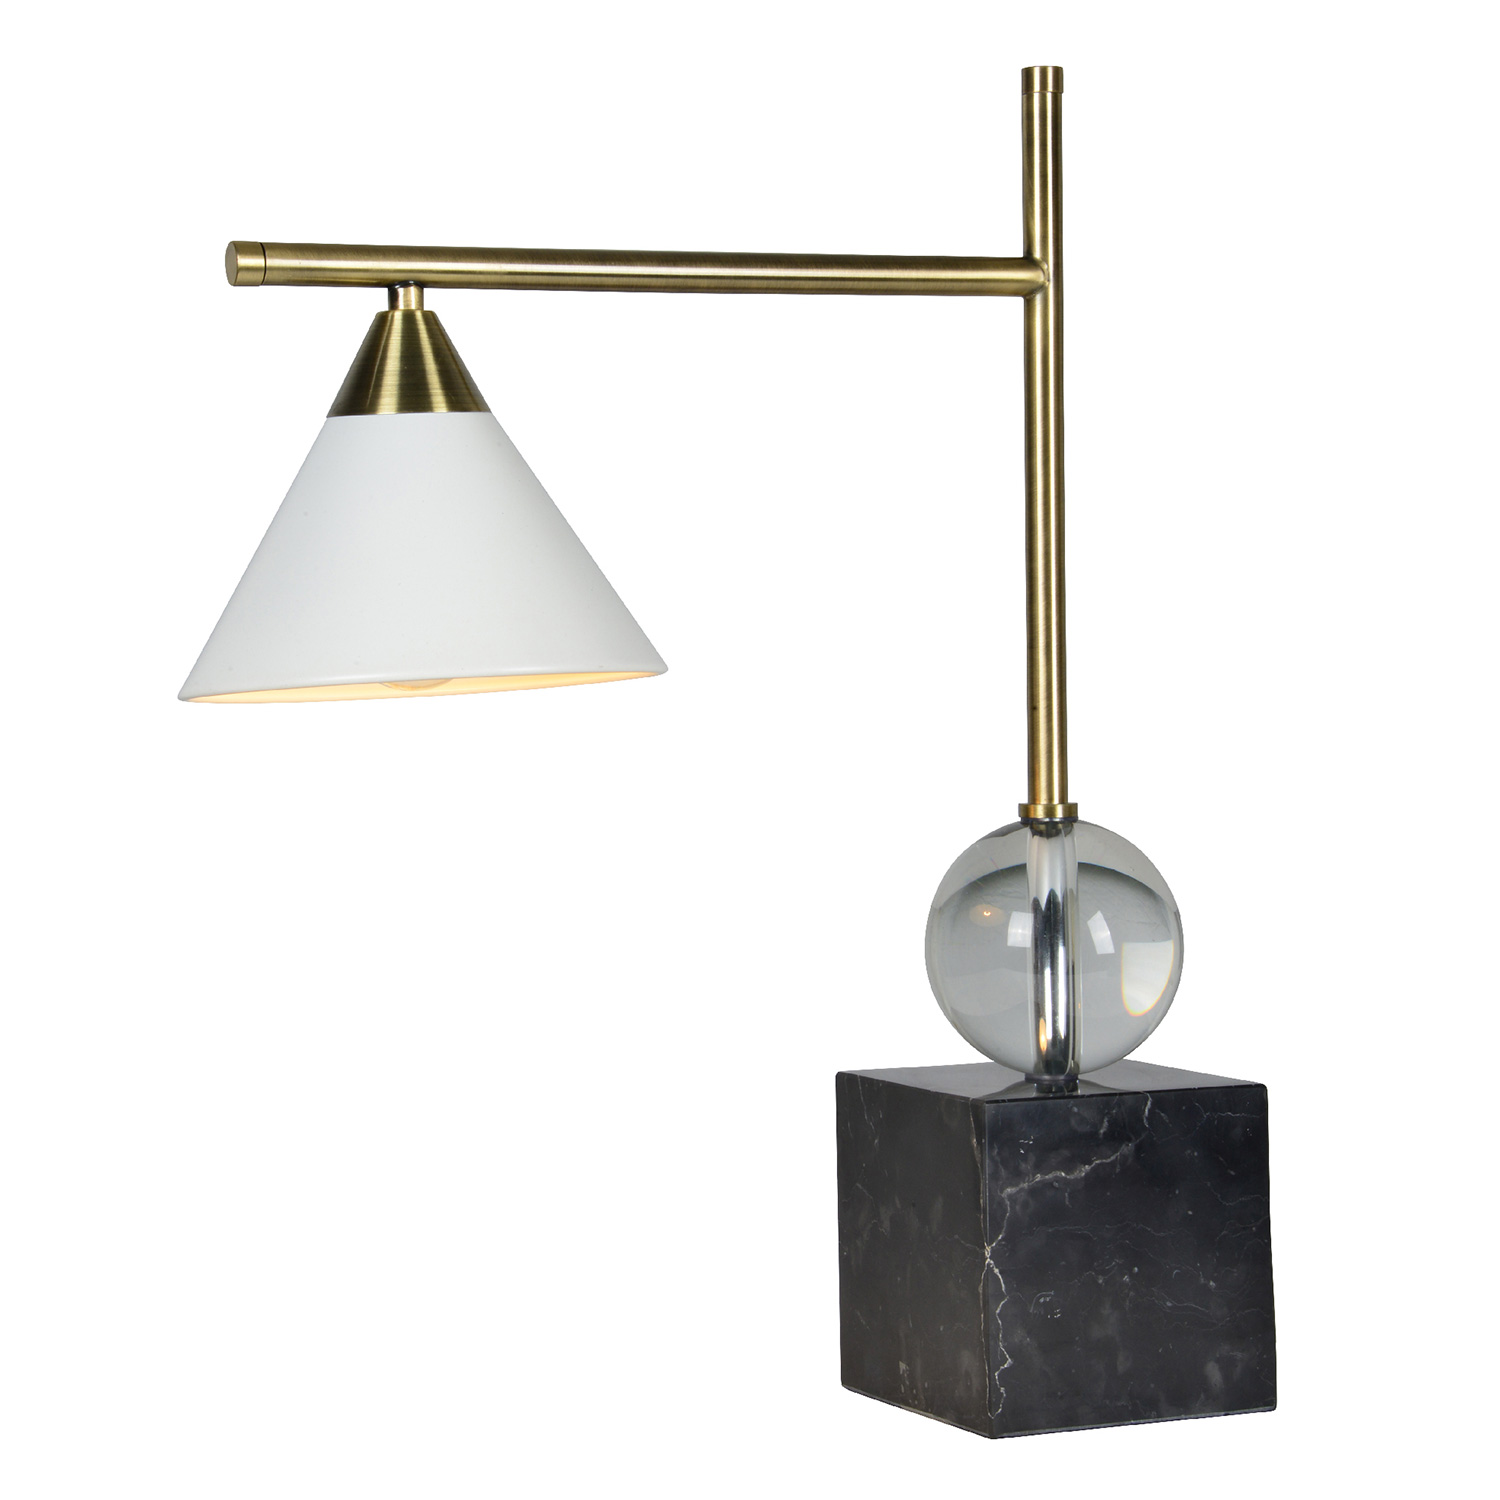 Ren-Wil Cruzo Table Lamp - Black and Gold